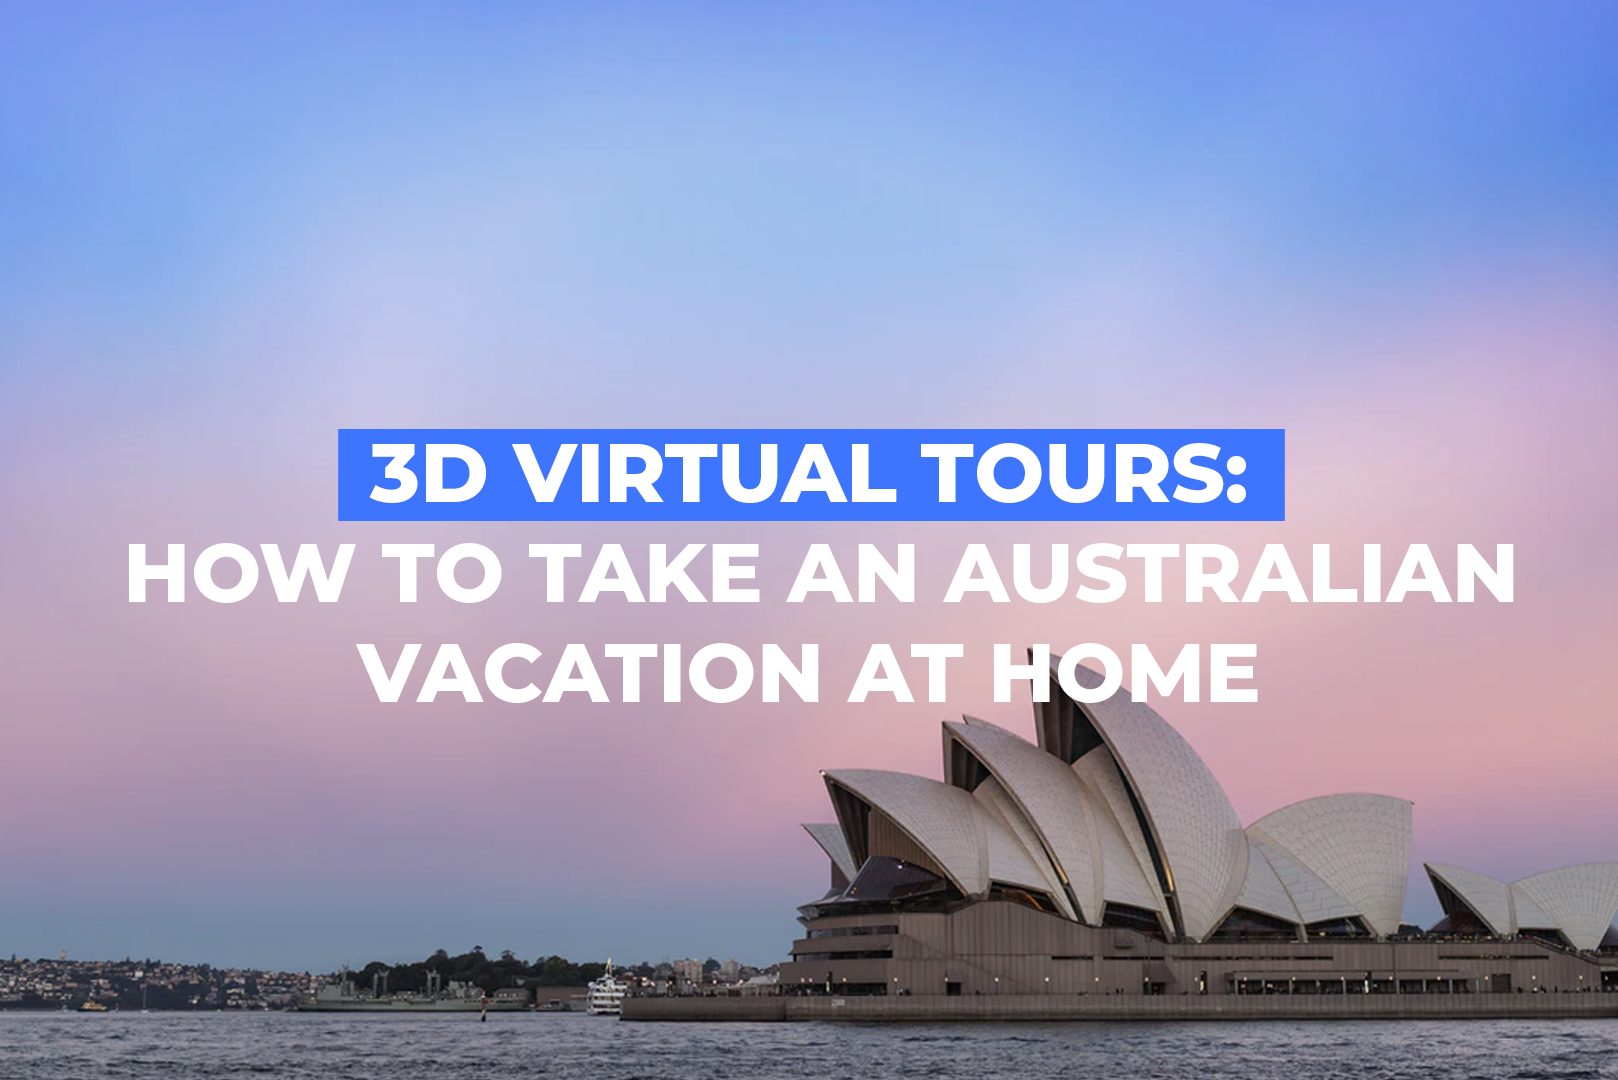 3D Virtual Tours: How To Take An Australian Vacation At Home